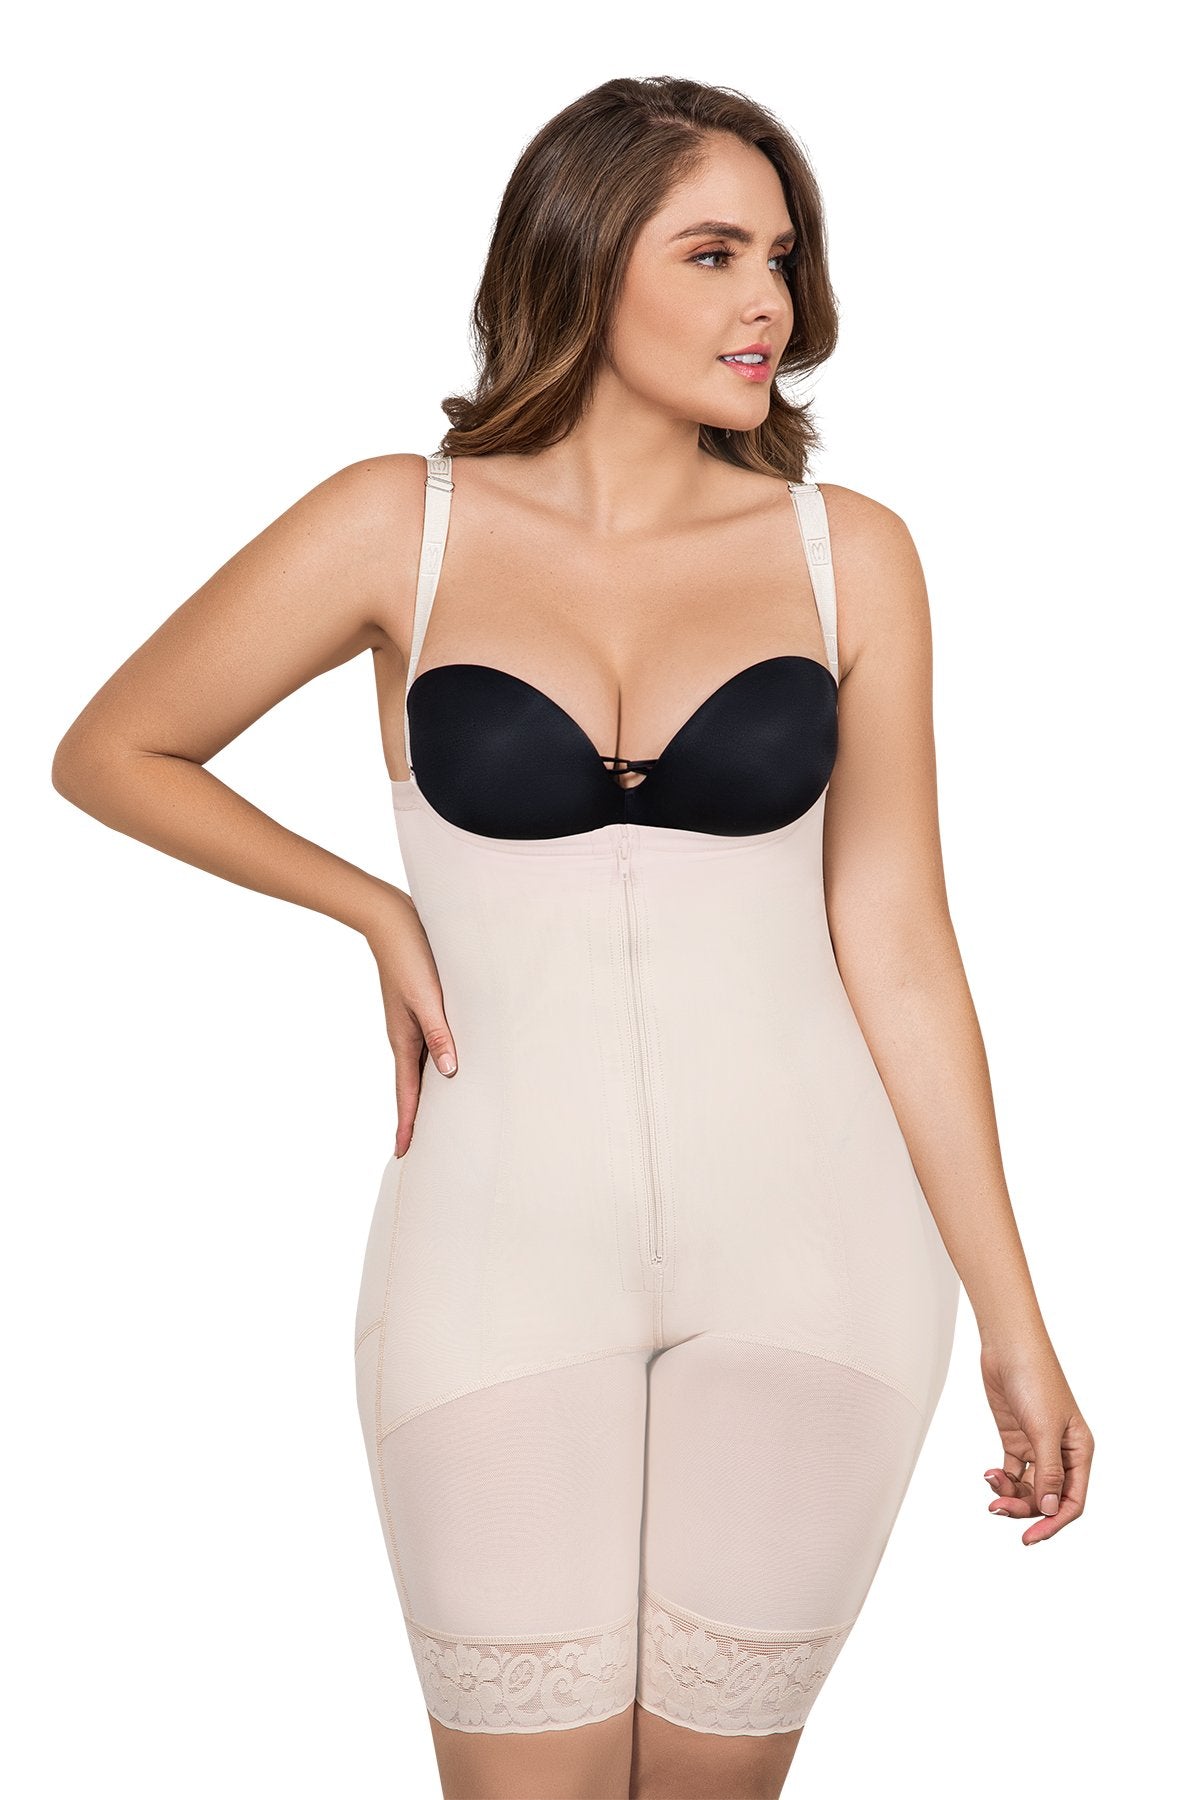 ALL-IN-ONE BODY SHAPER - Silhouettes and Curves